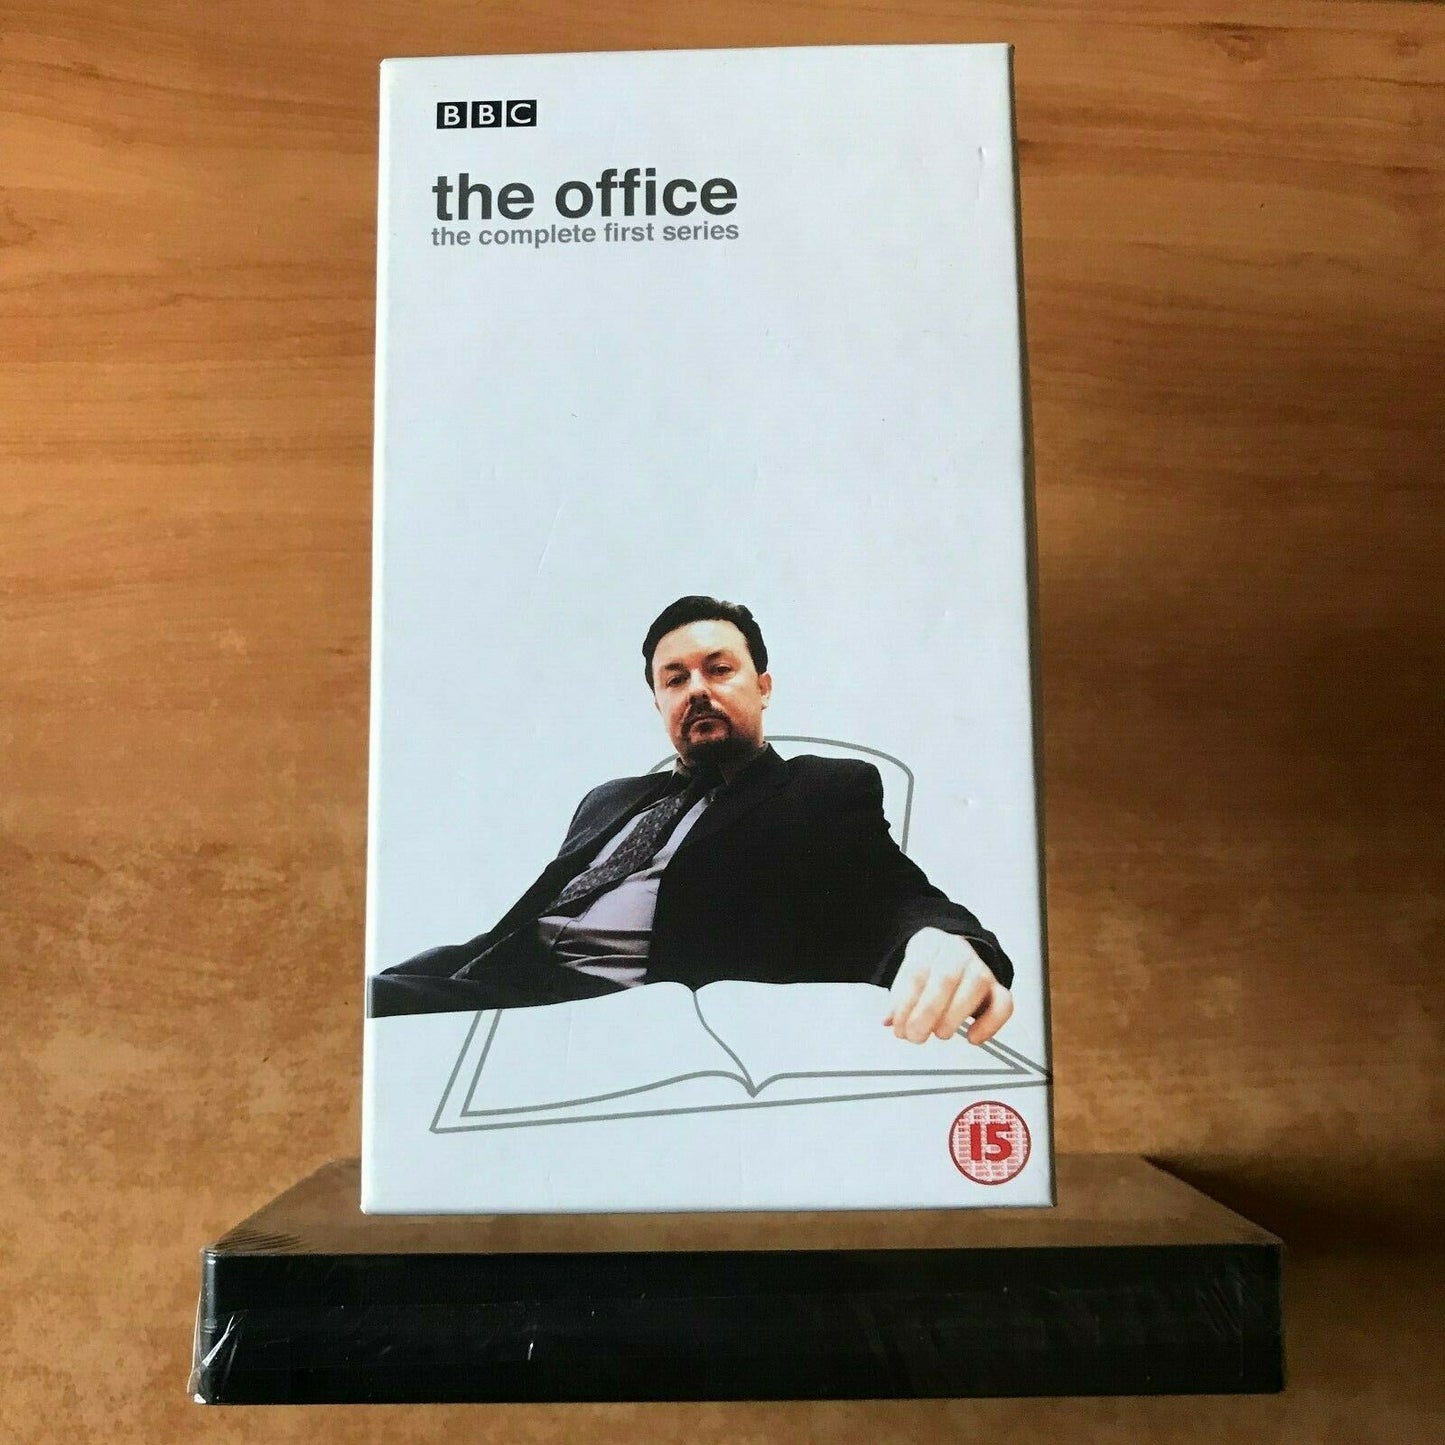 The Office [Complete 1st Series] New Sealed - BBC Comedy - Ricky Gervais - VHS-